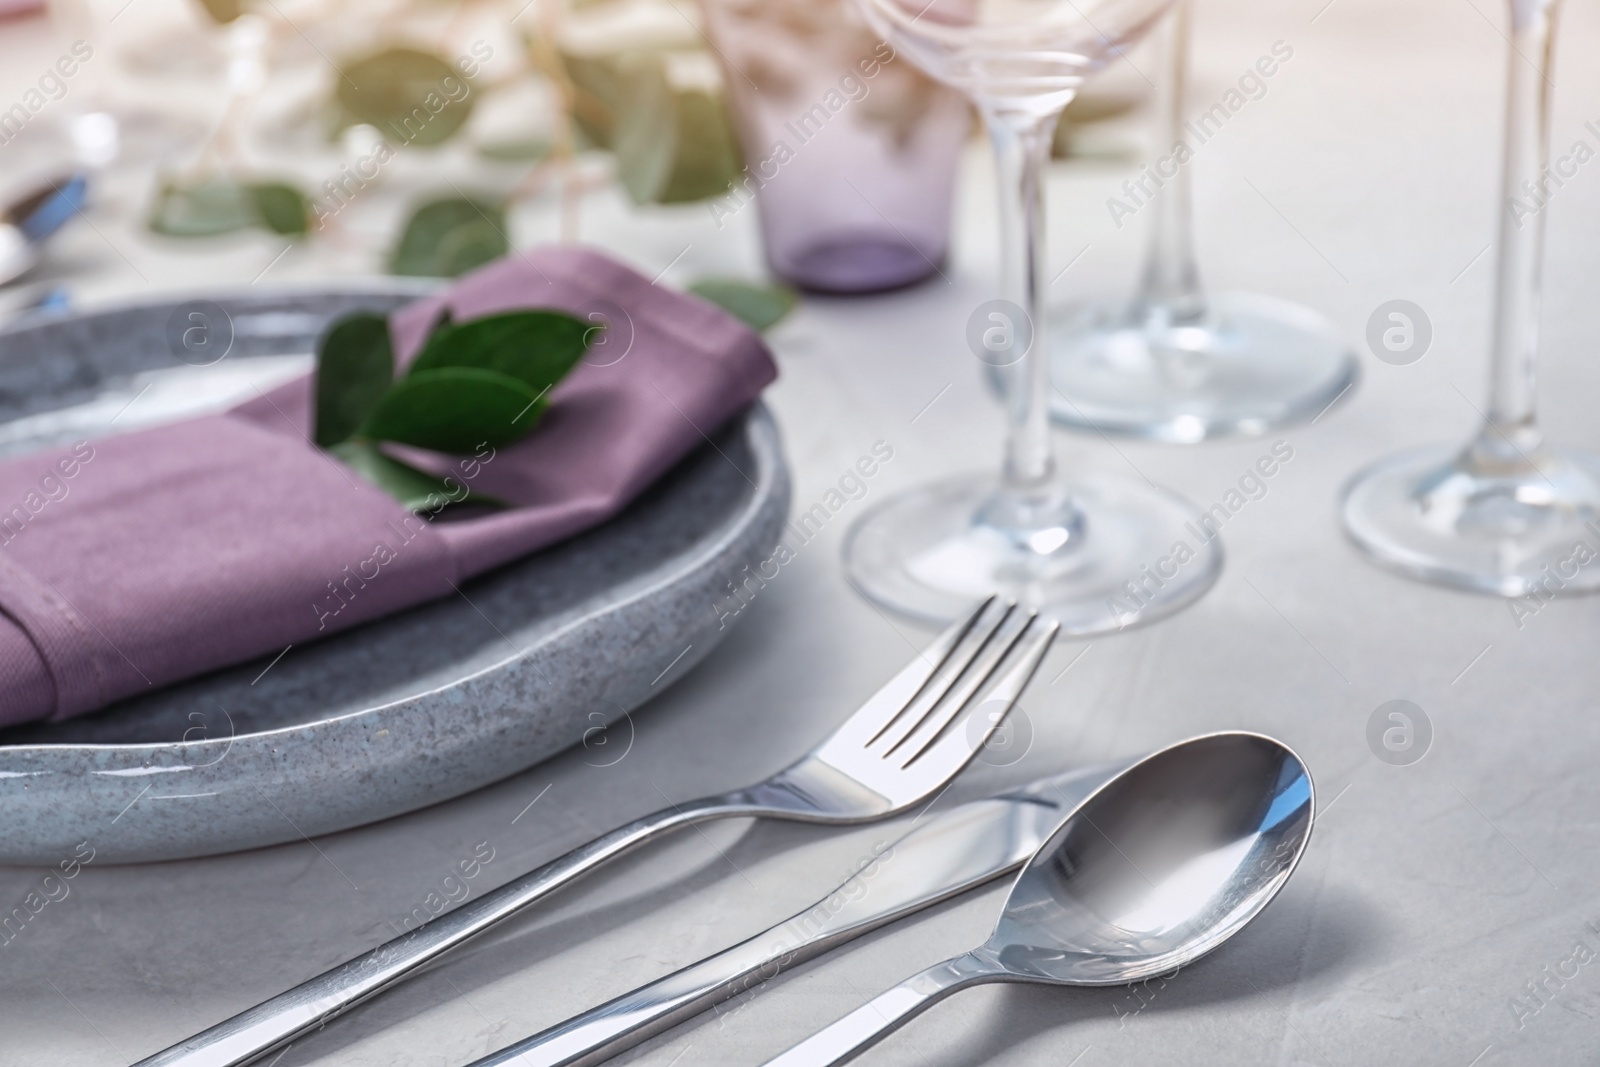 Photo of Cutlery, plate and napkin on light background, closeup. Festive table setting